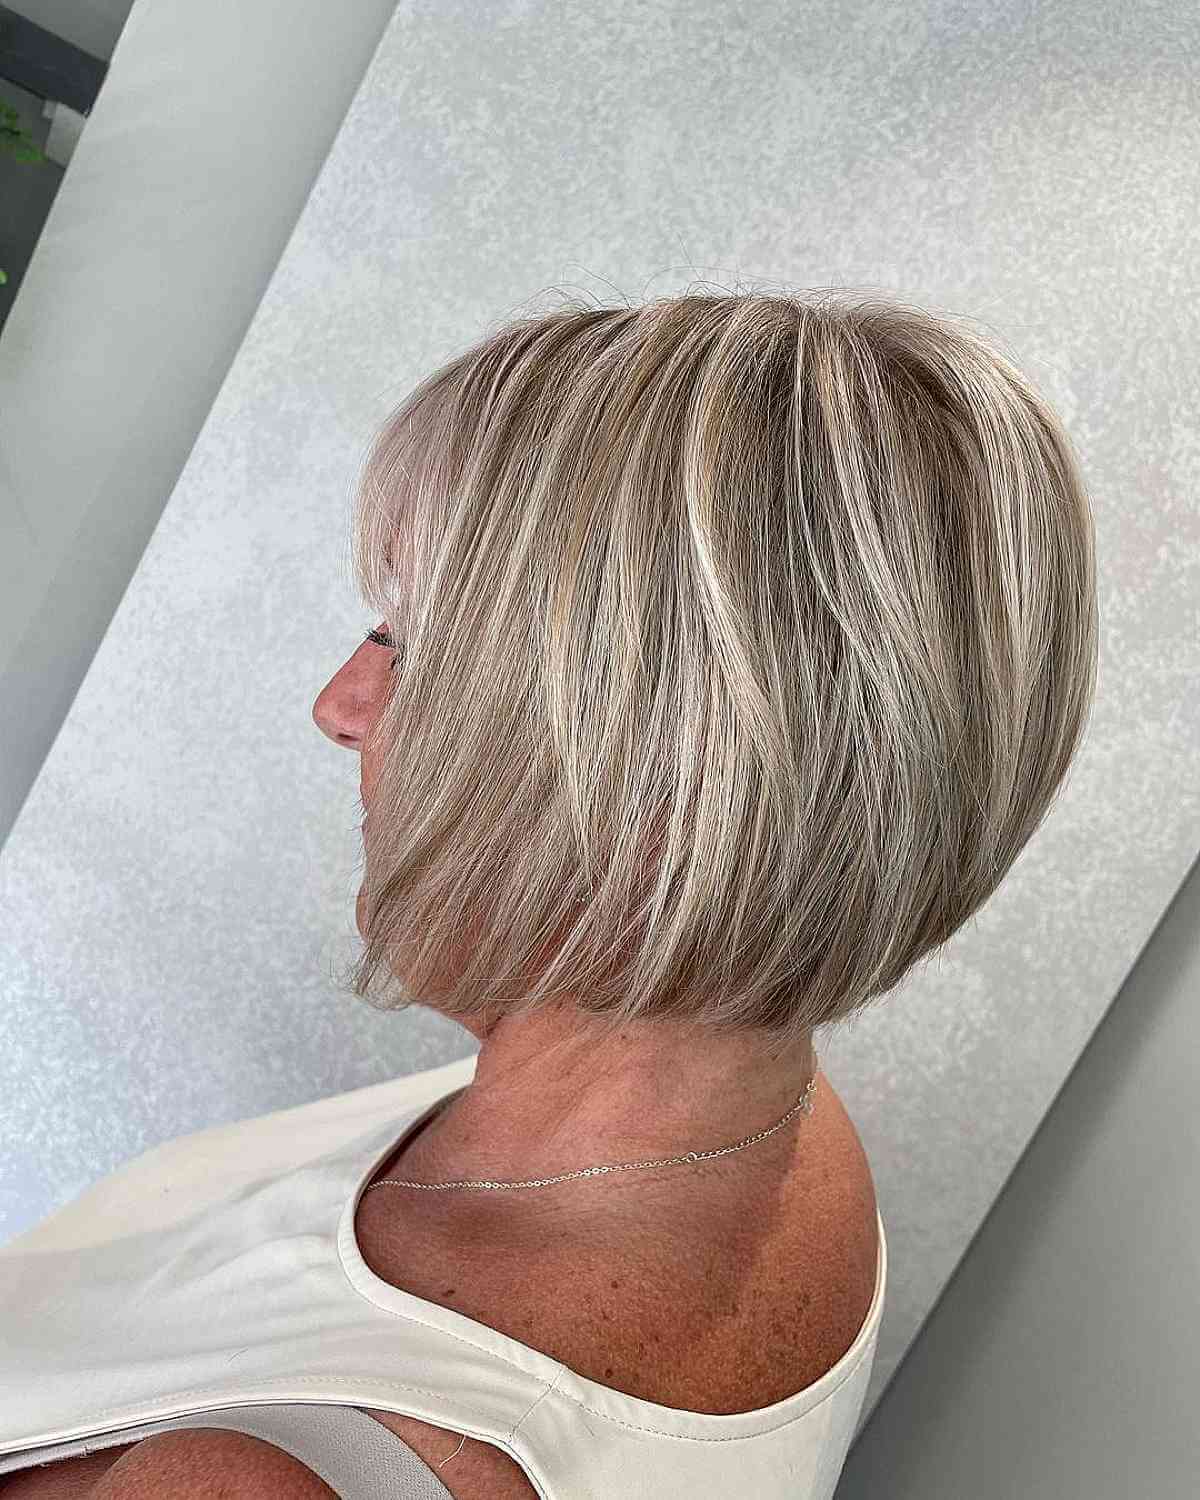 Polished Short Layered Bob for Women Over 50 with Fine Hair